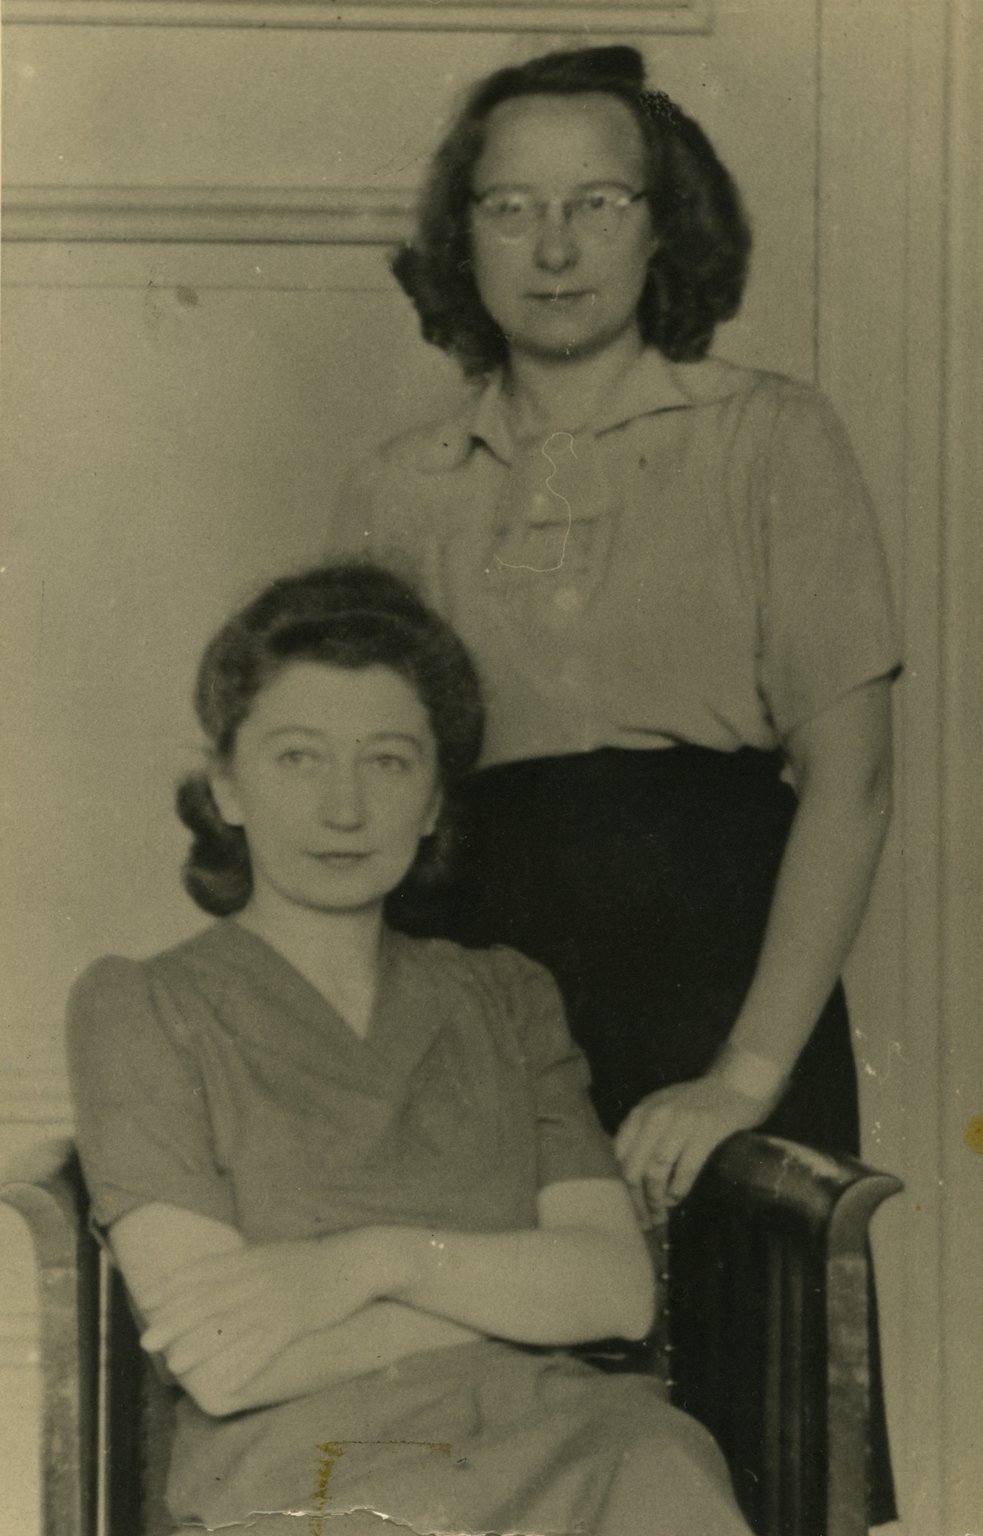 Miep Gies (seated) and Bep Voskuijl in the front office, Prinsengracht 263. Amsterdam, August 1945.